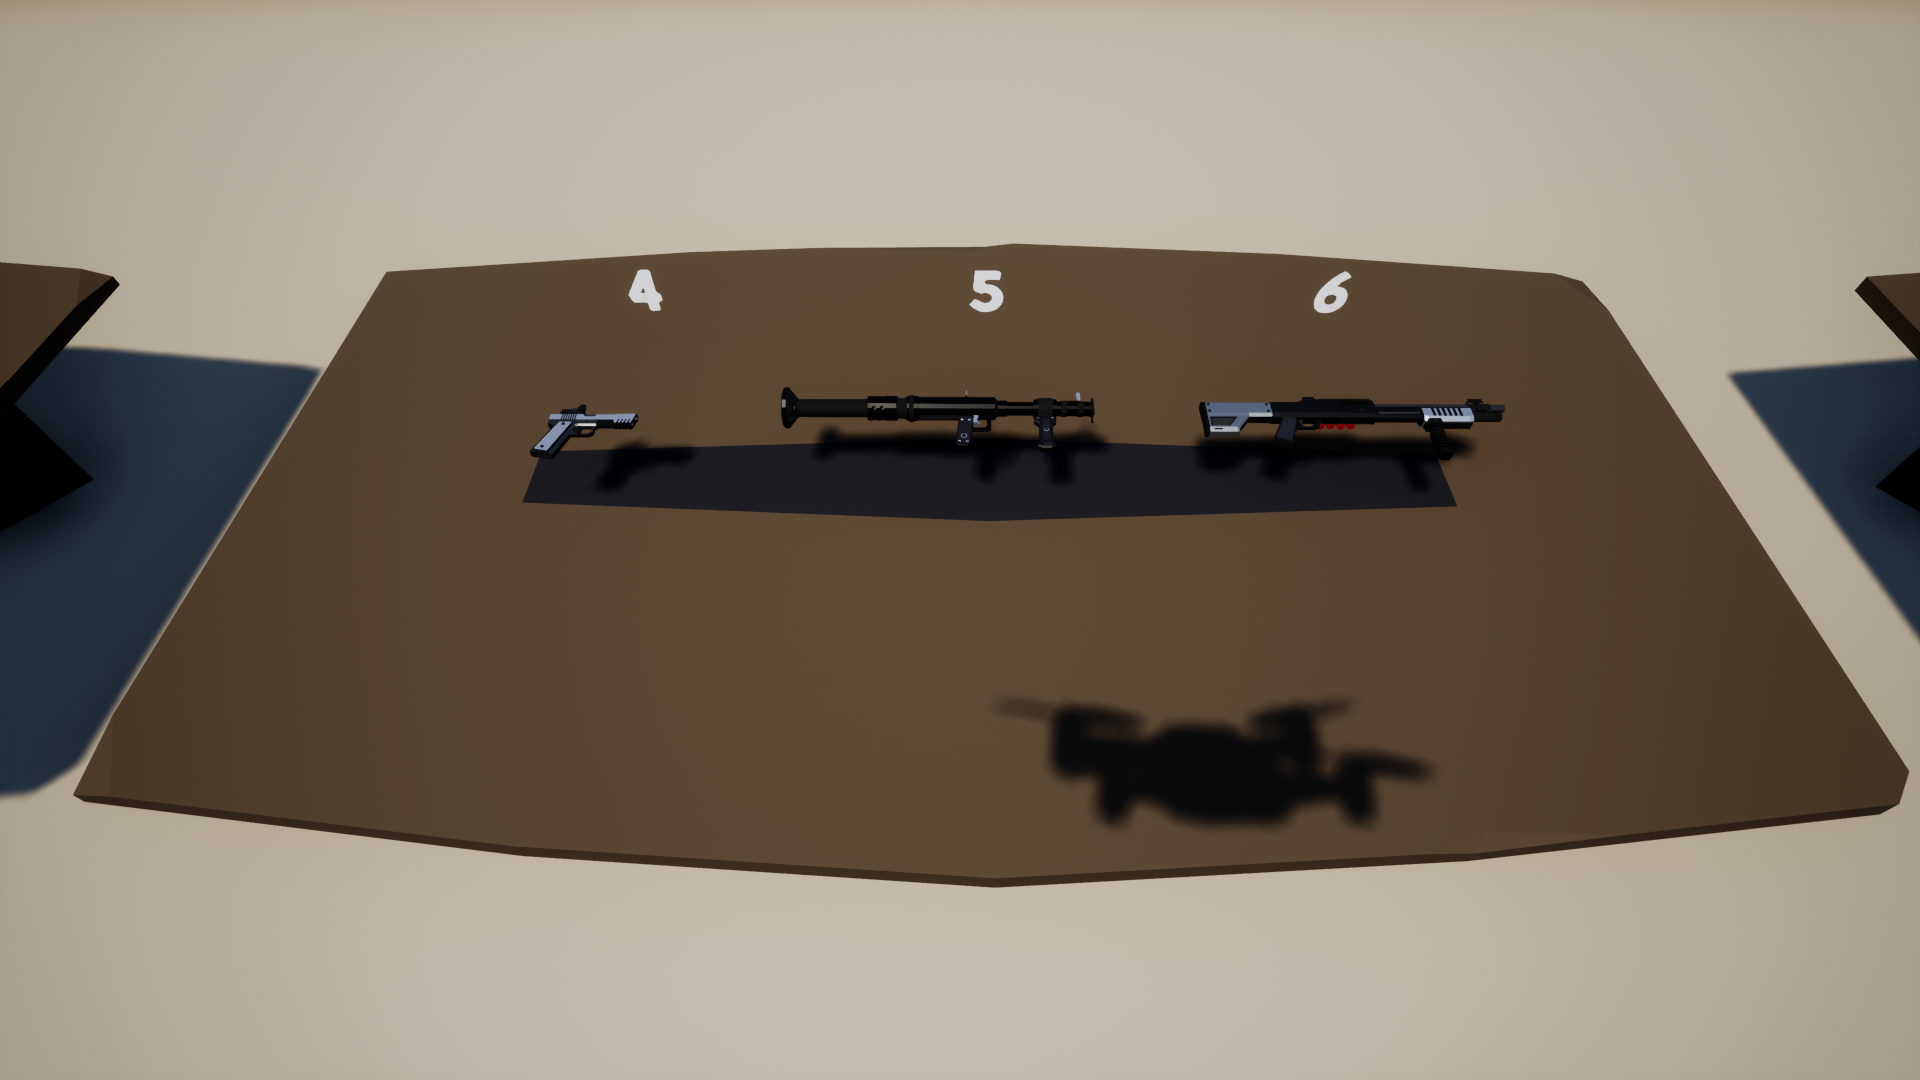 Perfect Heist 2 Level Editor Weapon Variant Selection - Weapons 4, 5, 6. - 9FE7AD3